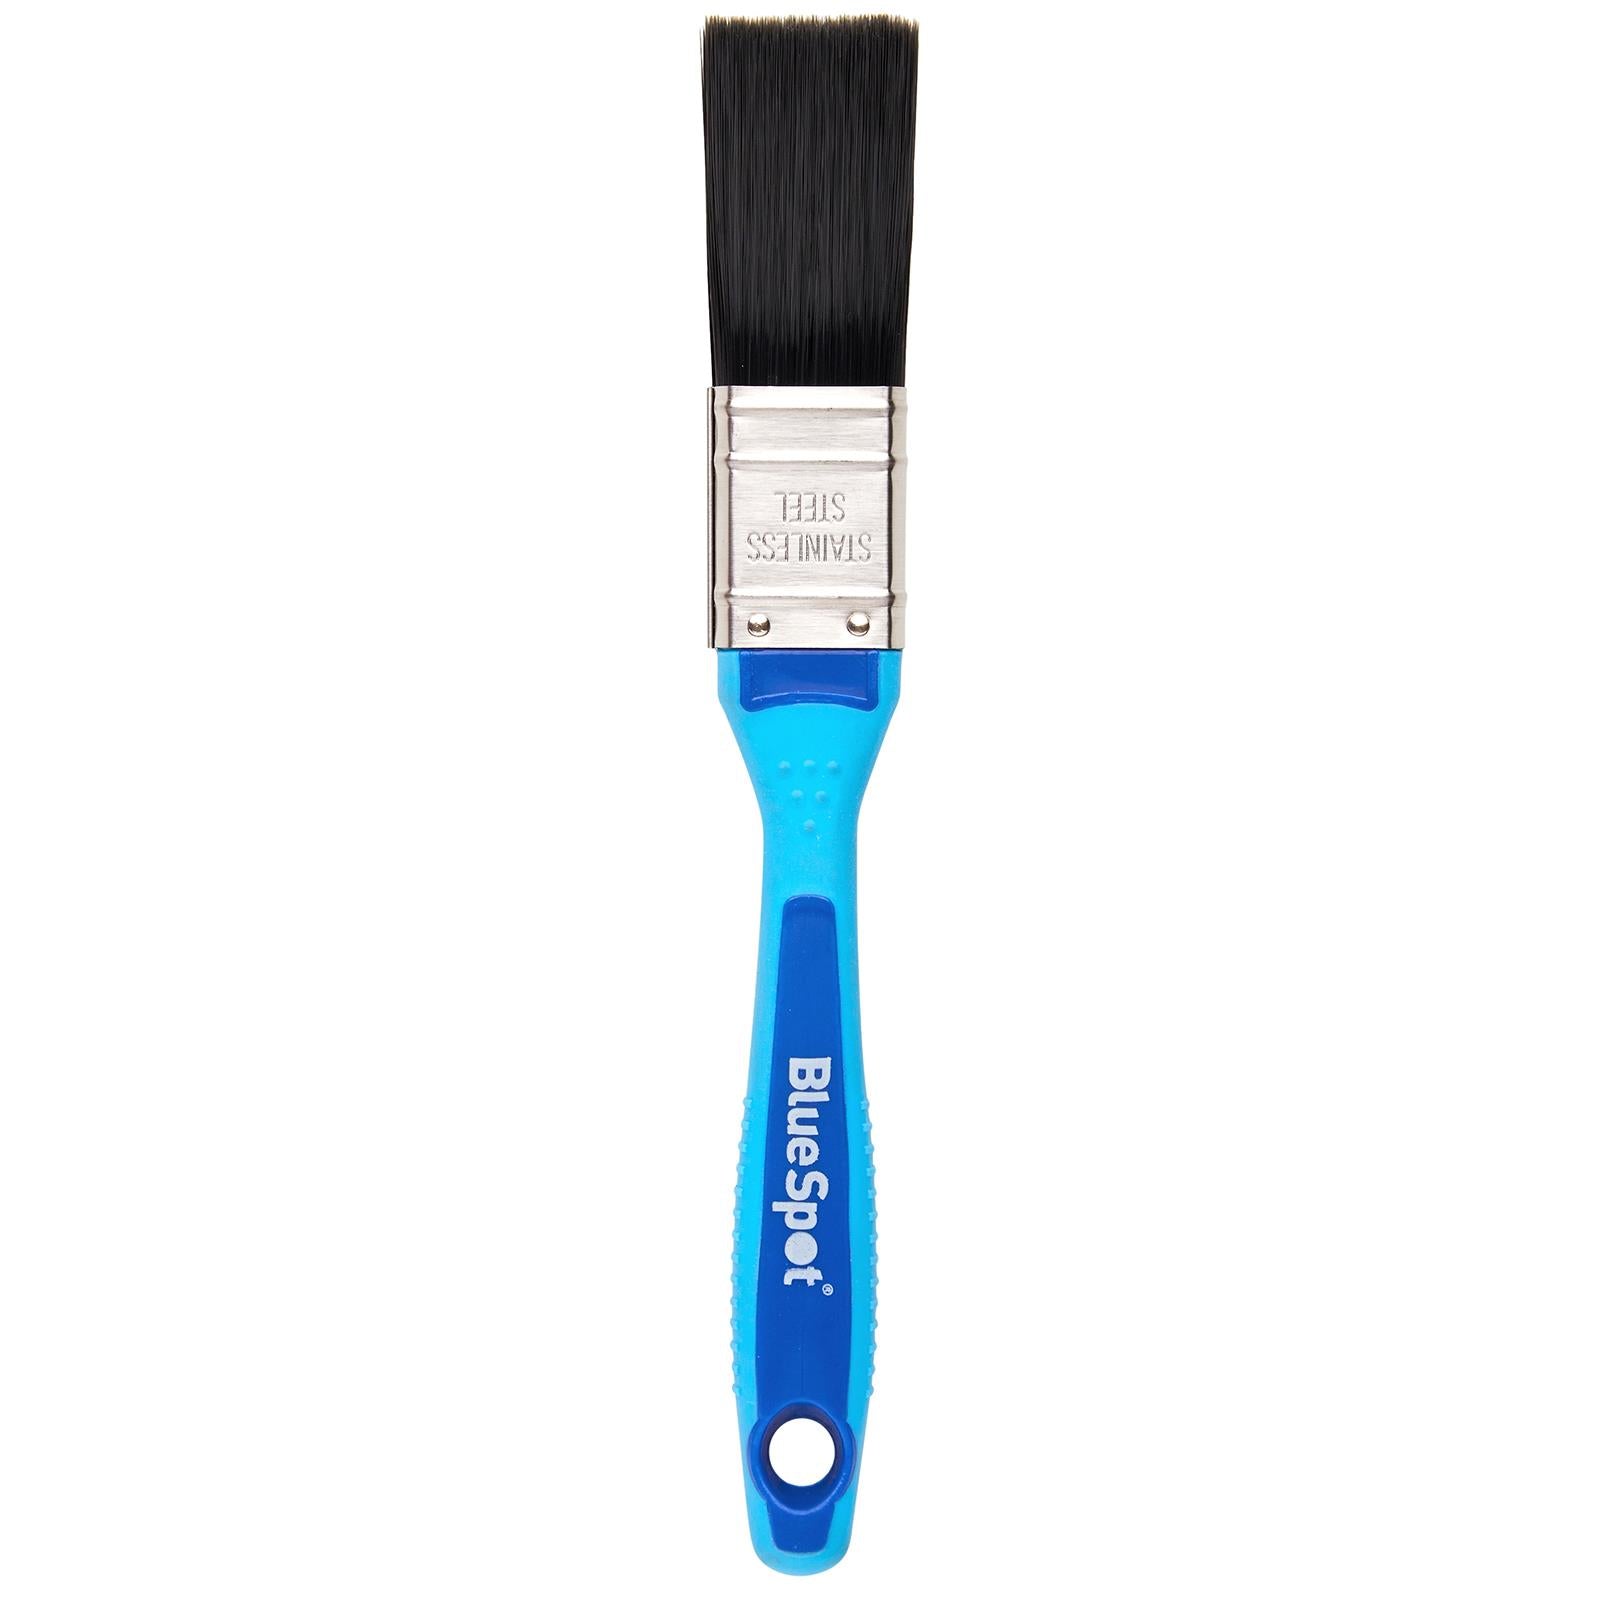 BlueSpot Synthetic Paint Brush with Soft Grip Handle 25mm (1")